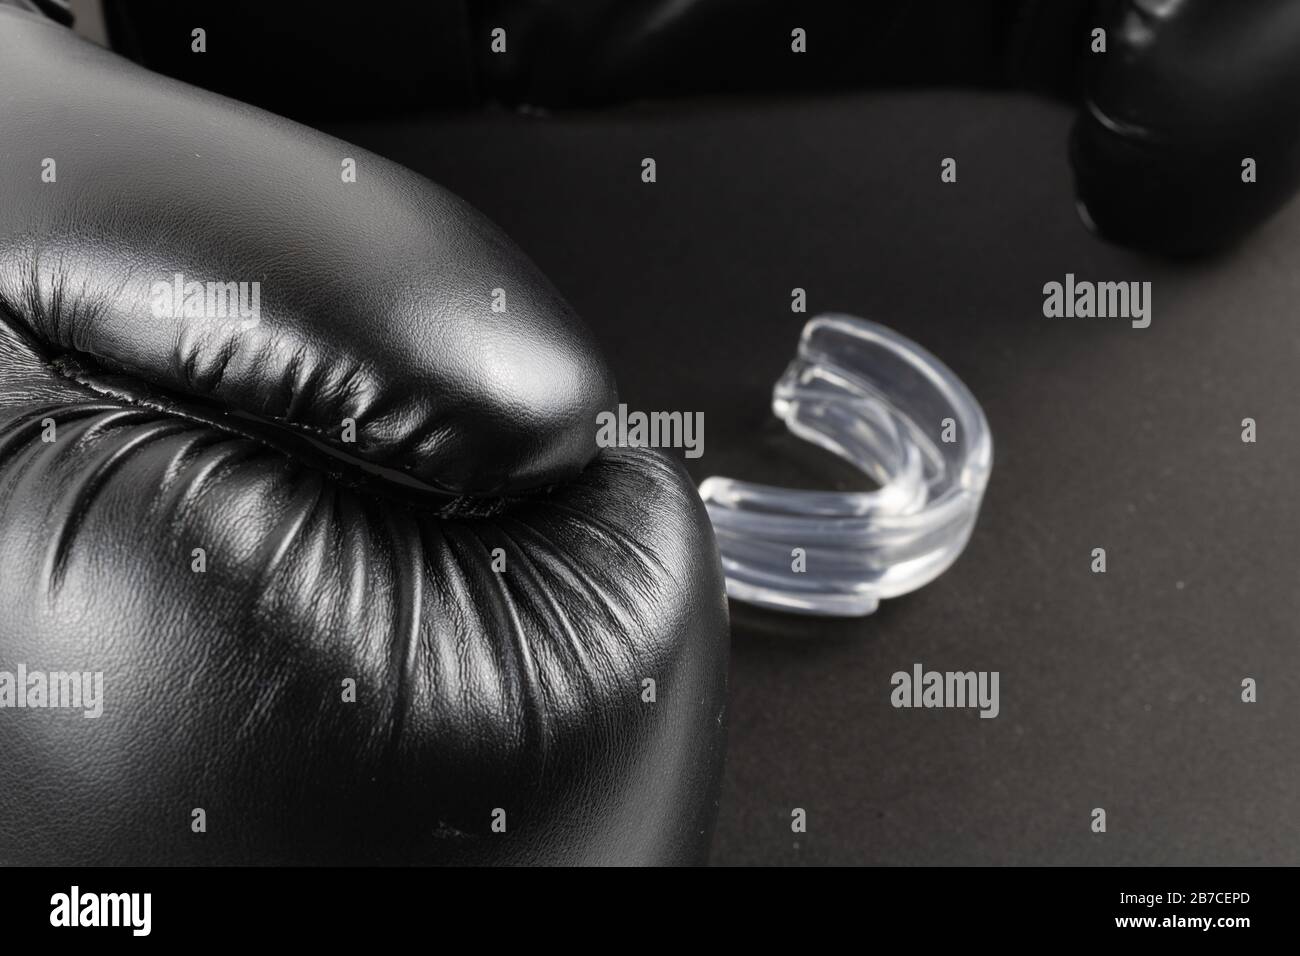 Boxing gloves and a mouth guard on a black background. product image Stock Photo